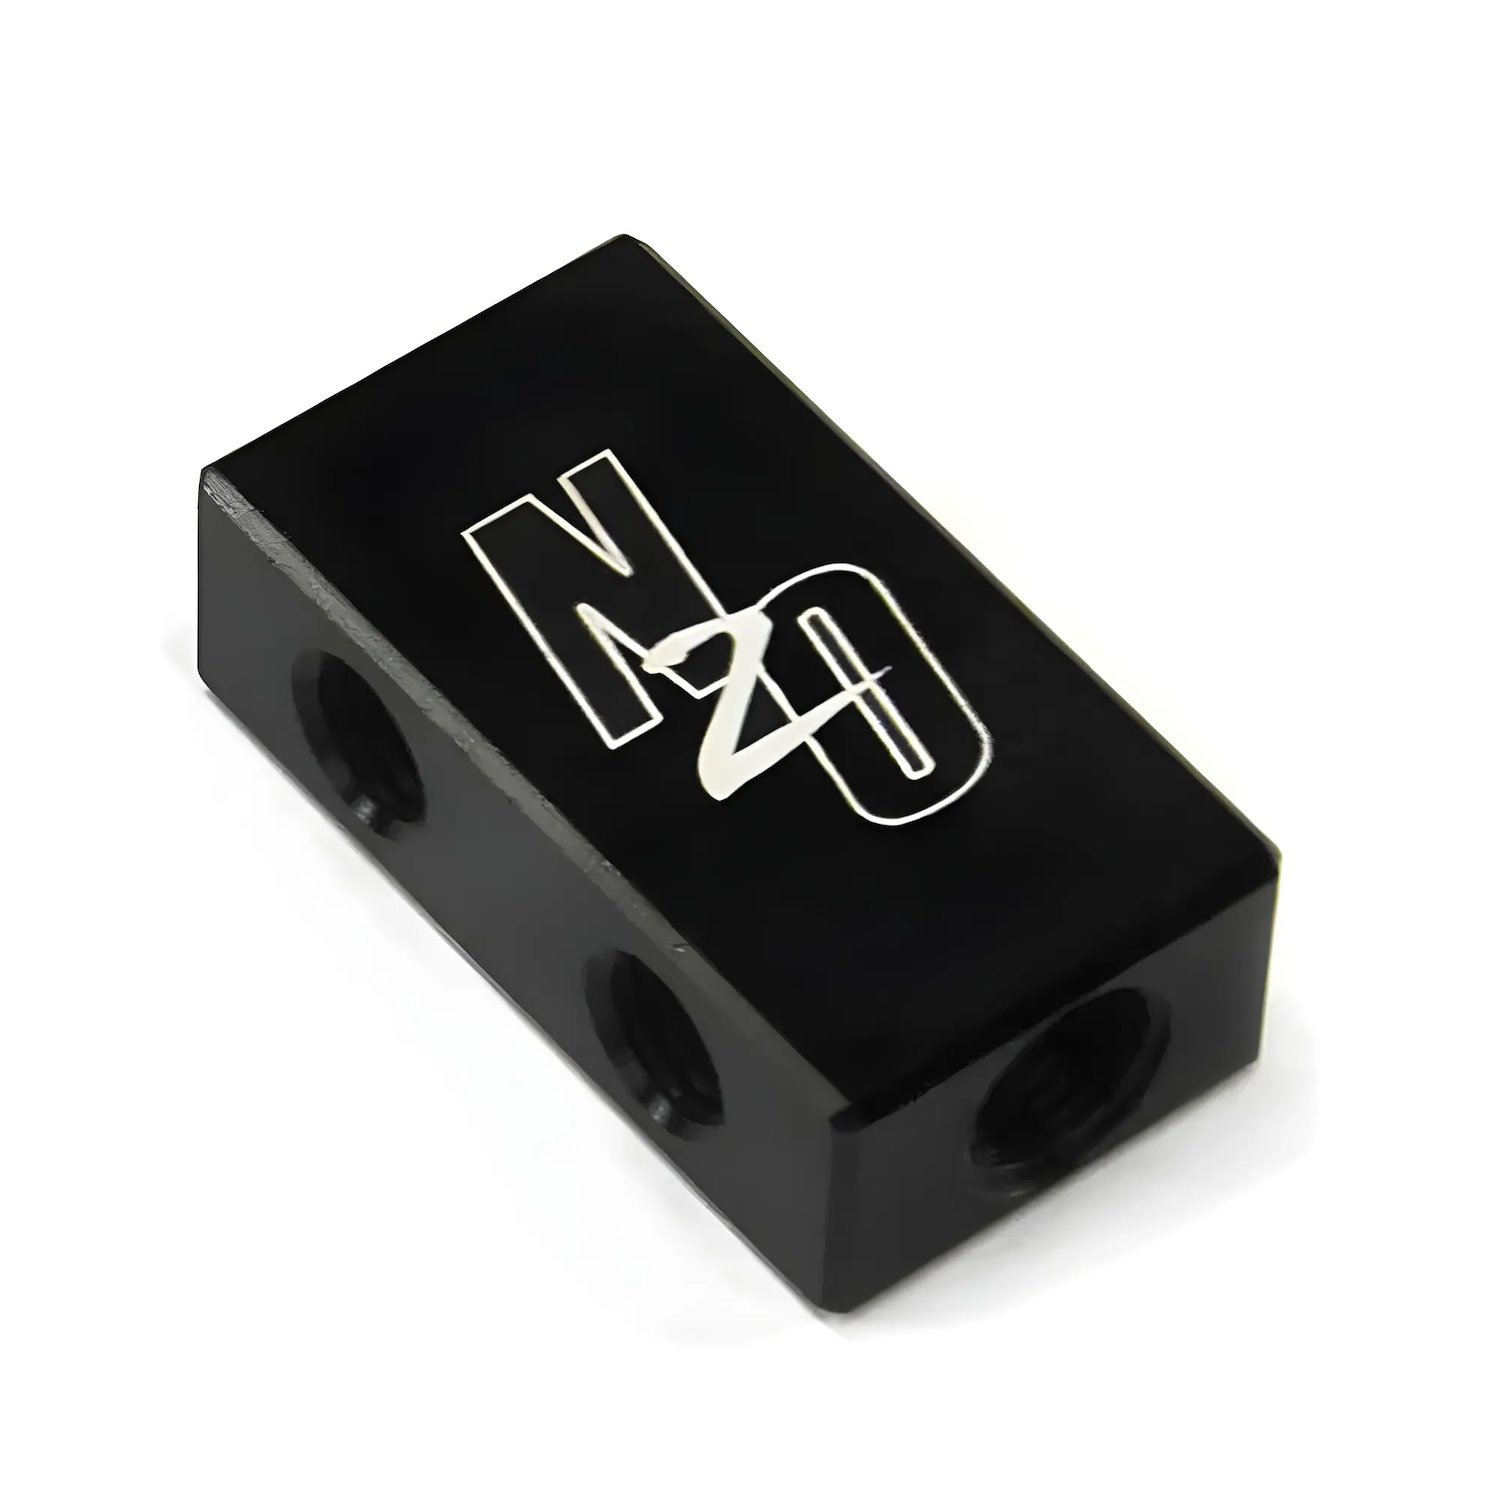 00-01760 Compact 2 in 4 Out Sensor Port Distribution Block, 1/8 in. NPT Inlets, 5/16-24 in. Outlets